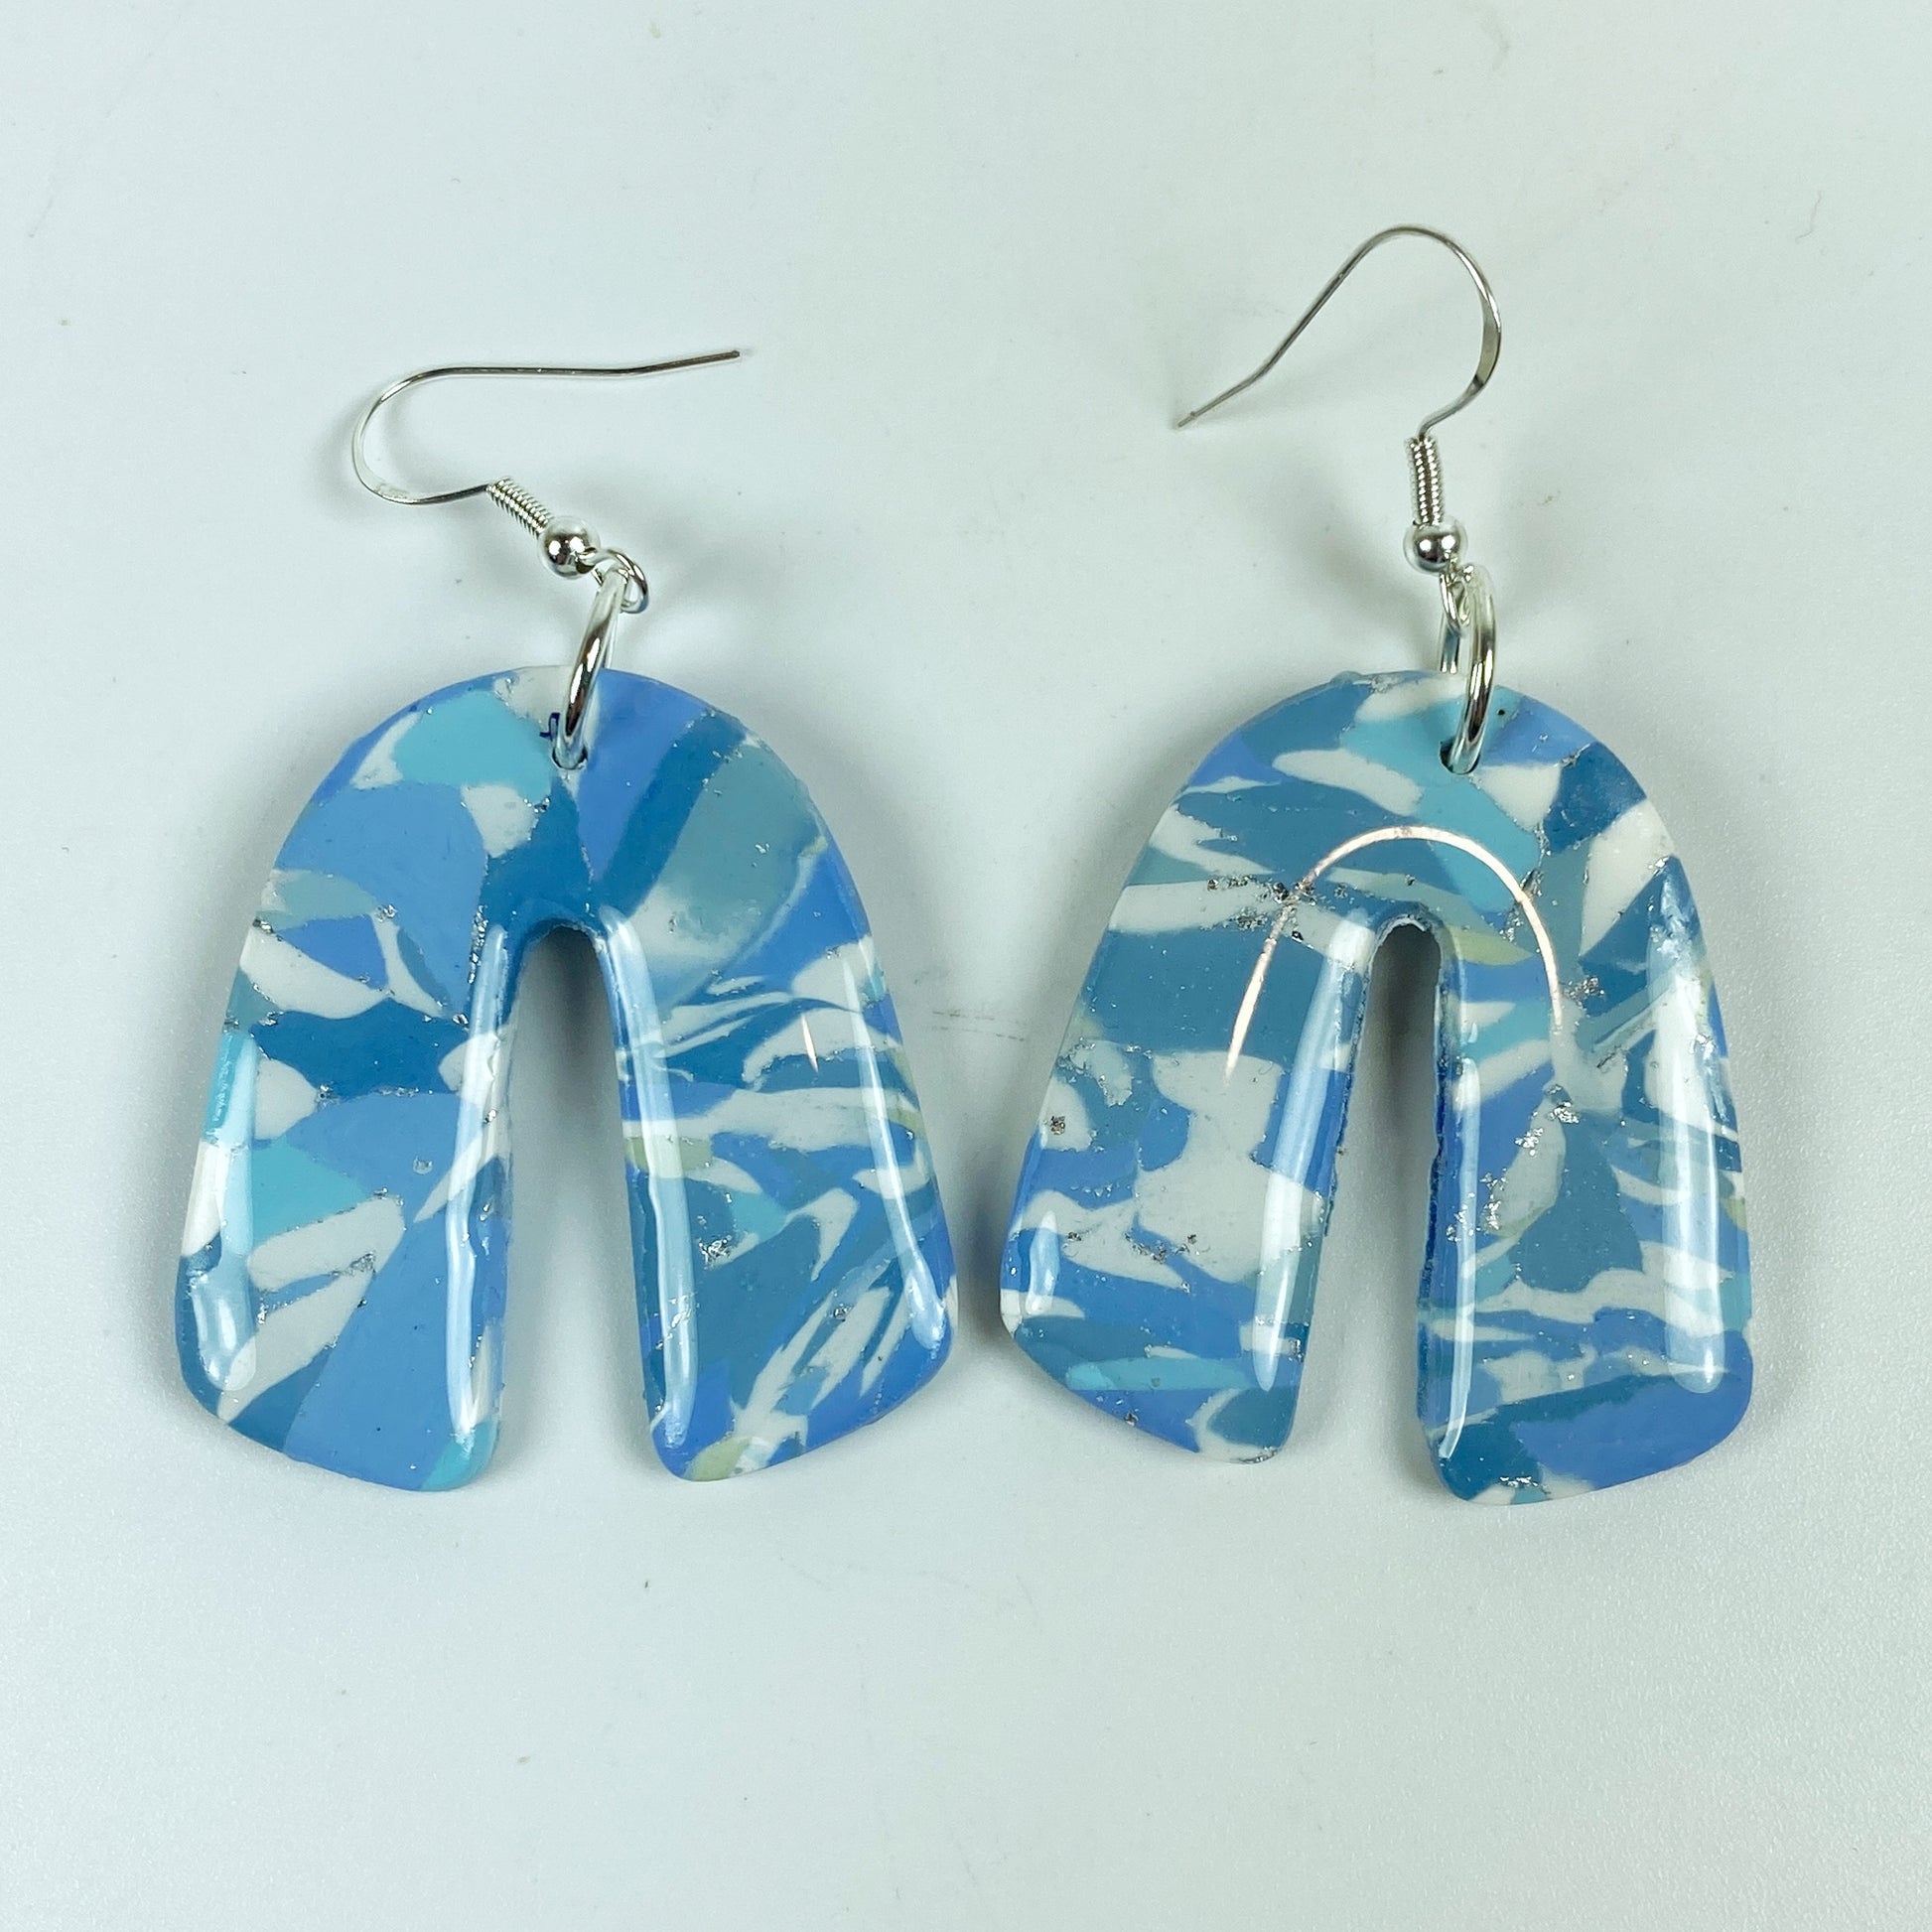 Moody Blue Handmade Polymer Clay Dangle Rainbow Shaped Earrings front view